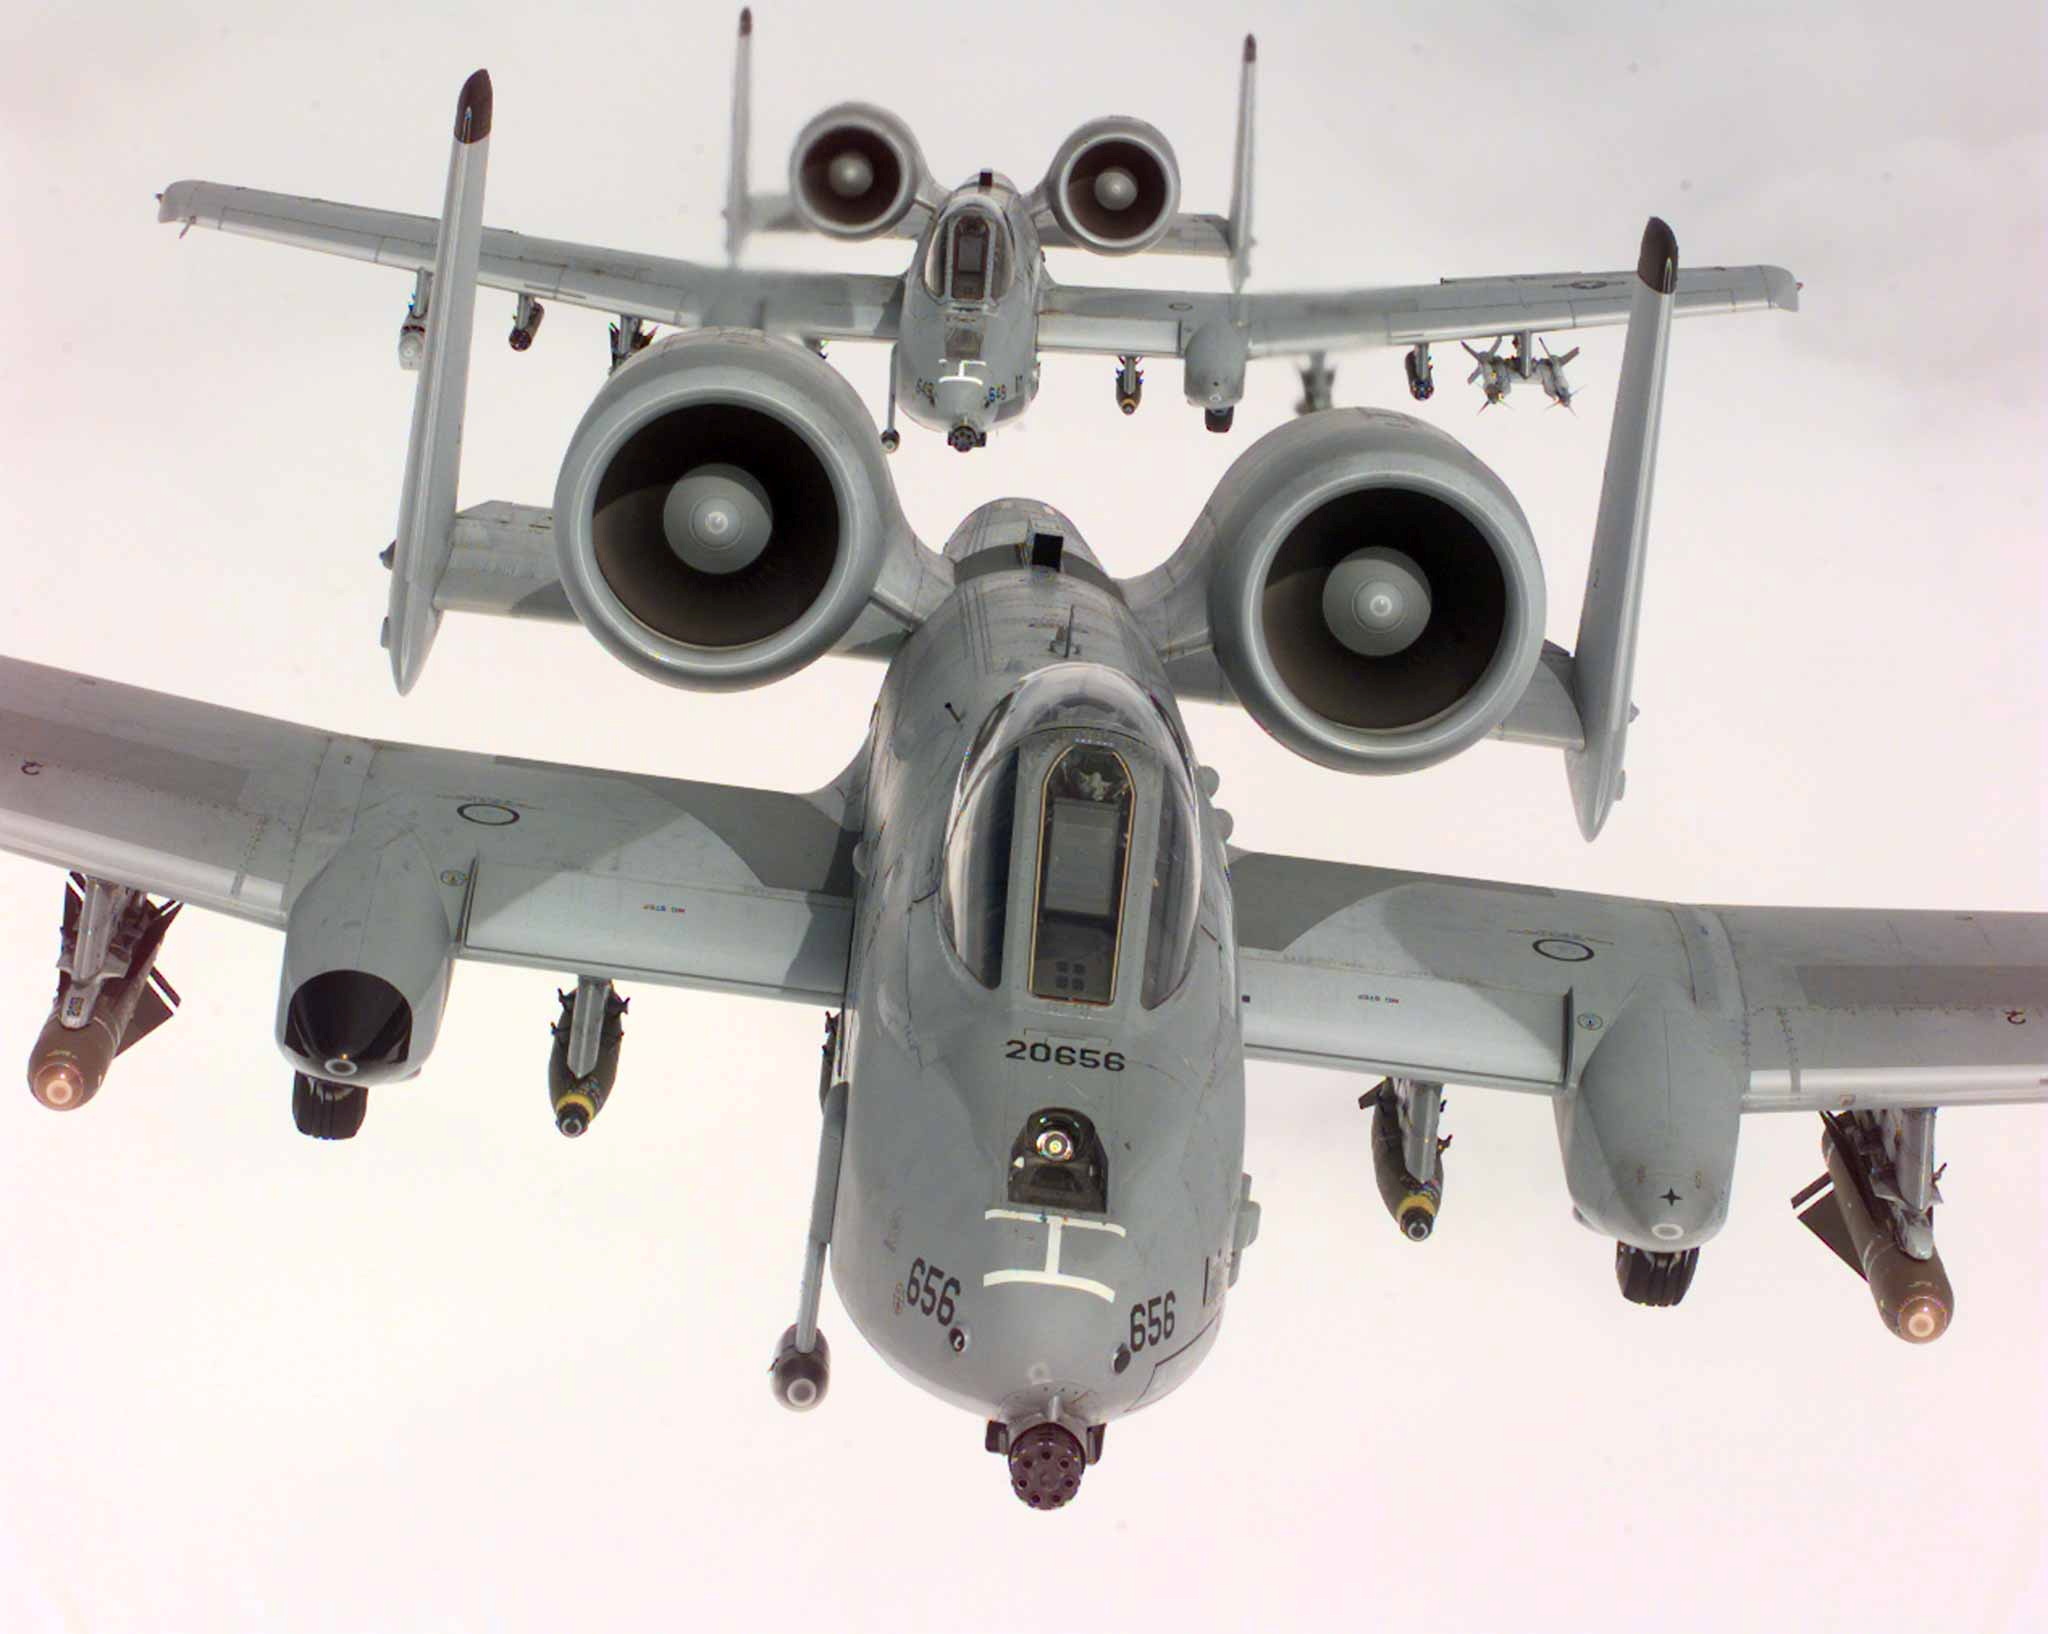 Two U.S. Air Force A-10A Warthogs, from the 52nd Fighter Wing, 81st Fighter Squadron, Spangdhalem Ai..